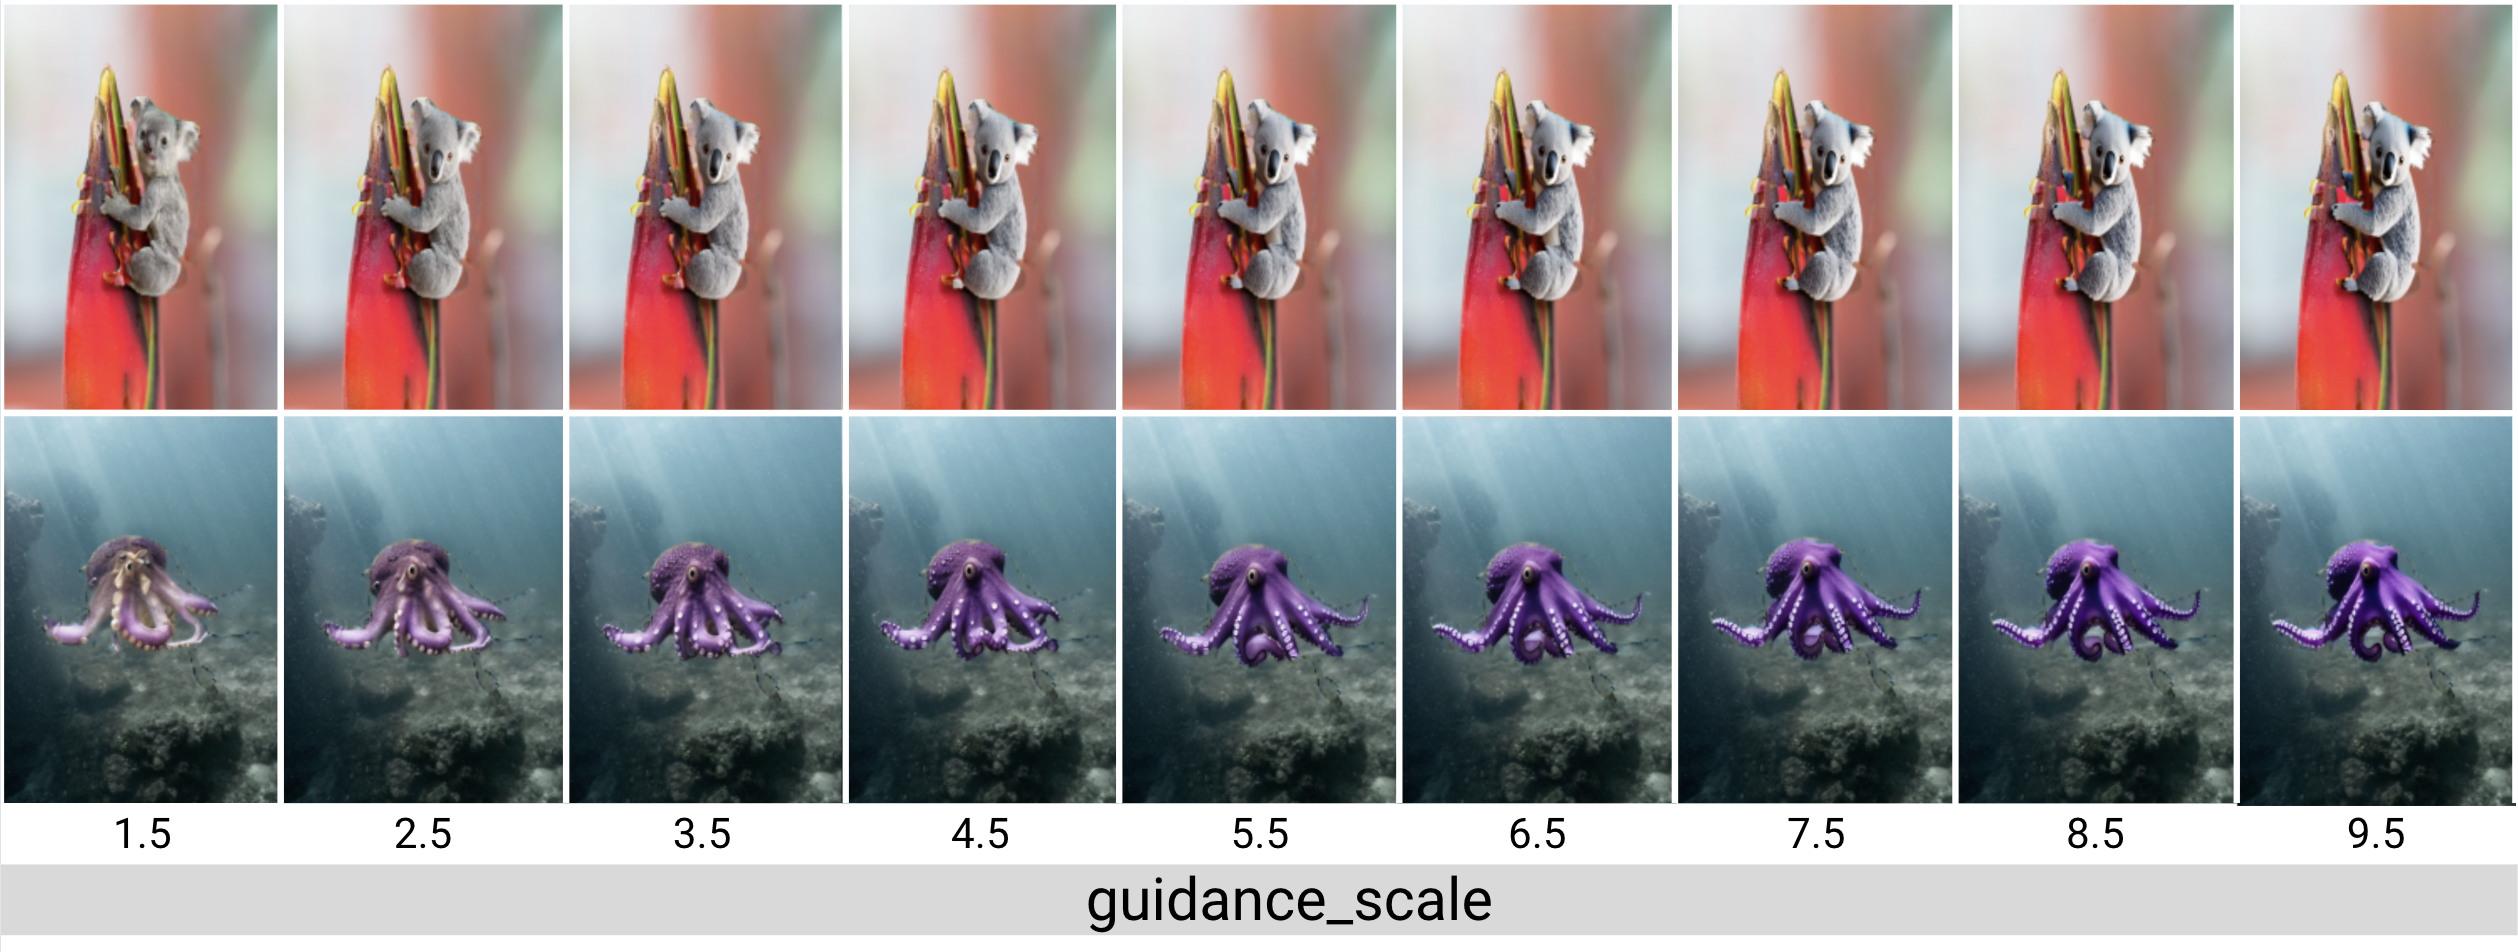 Image of koala and octopus inpainted by SDXL over a range of guidance scale values